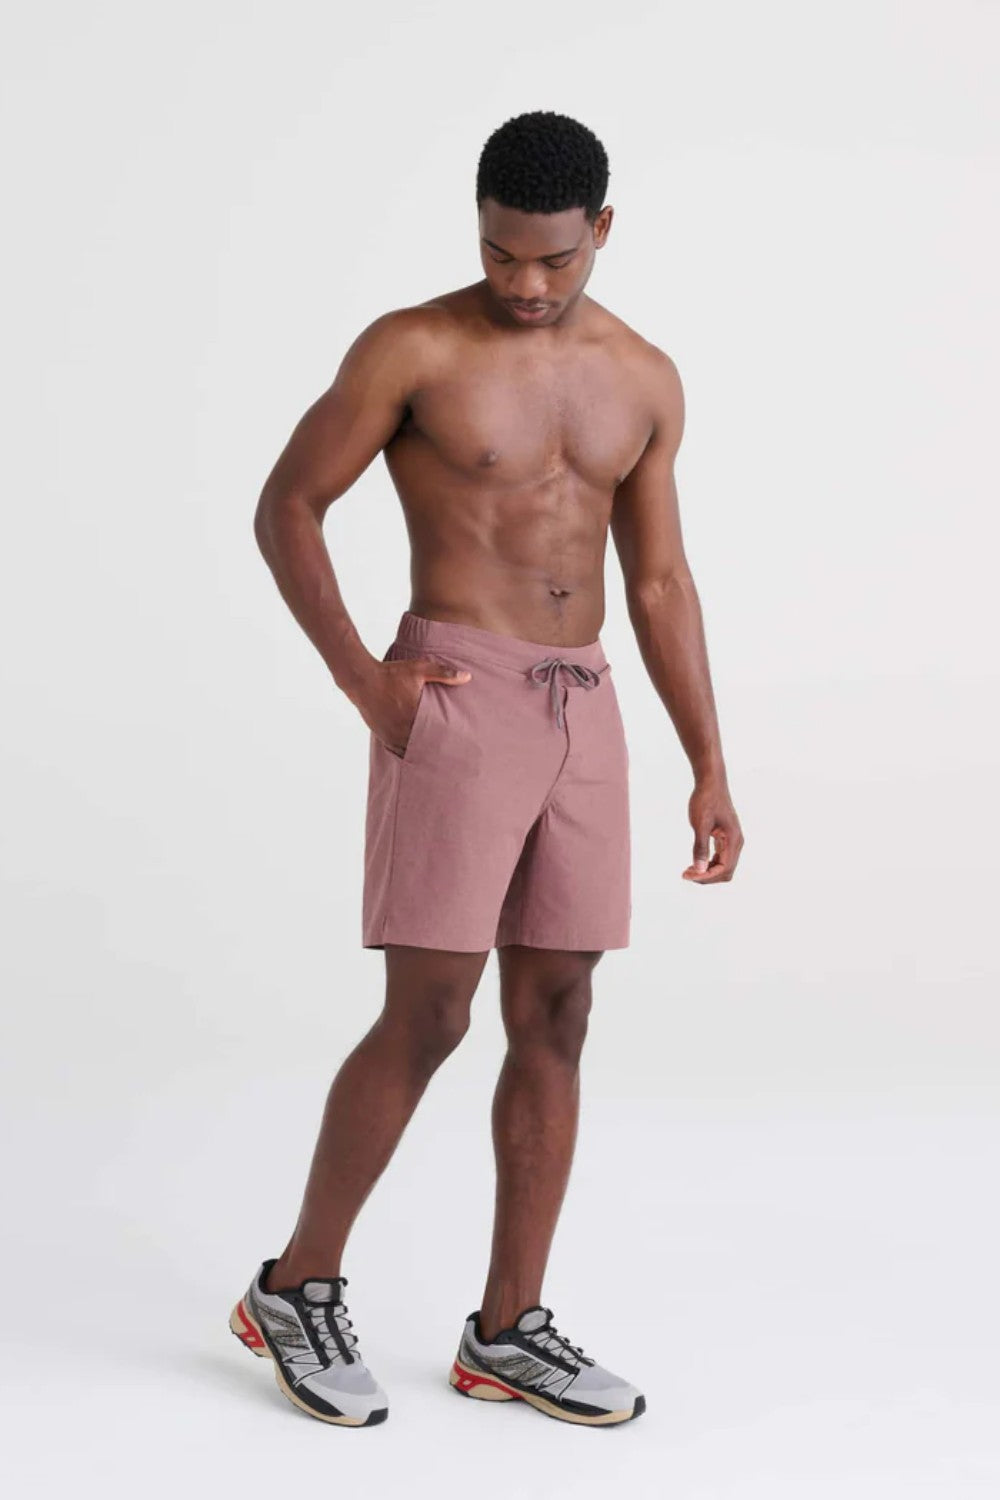 HOW IT FITS * These 2N1 performance shorts combine a slim fit liner with a standard fit shell. Enjoy unrestricted movement in this versatile style. MADE FOR * Working out to hanging out. With Sport 2 Life's integrated Sport Mesh liner and built-in BallPark Pouch, experience increased breathability and support.